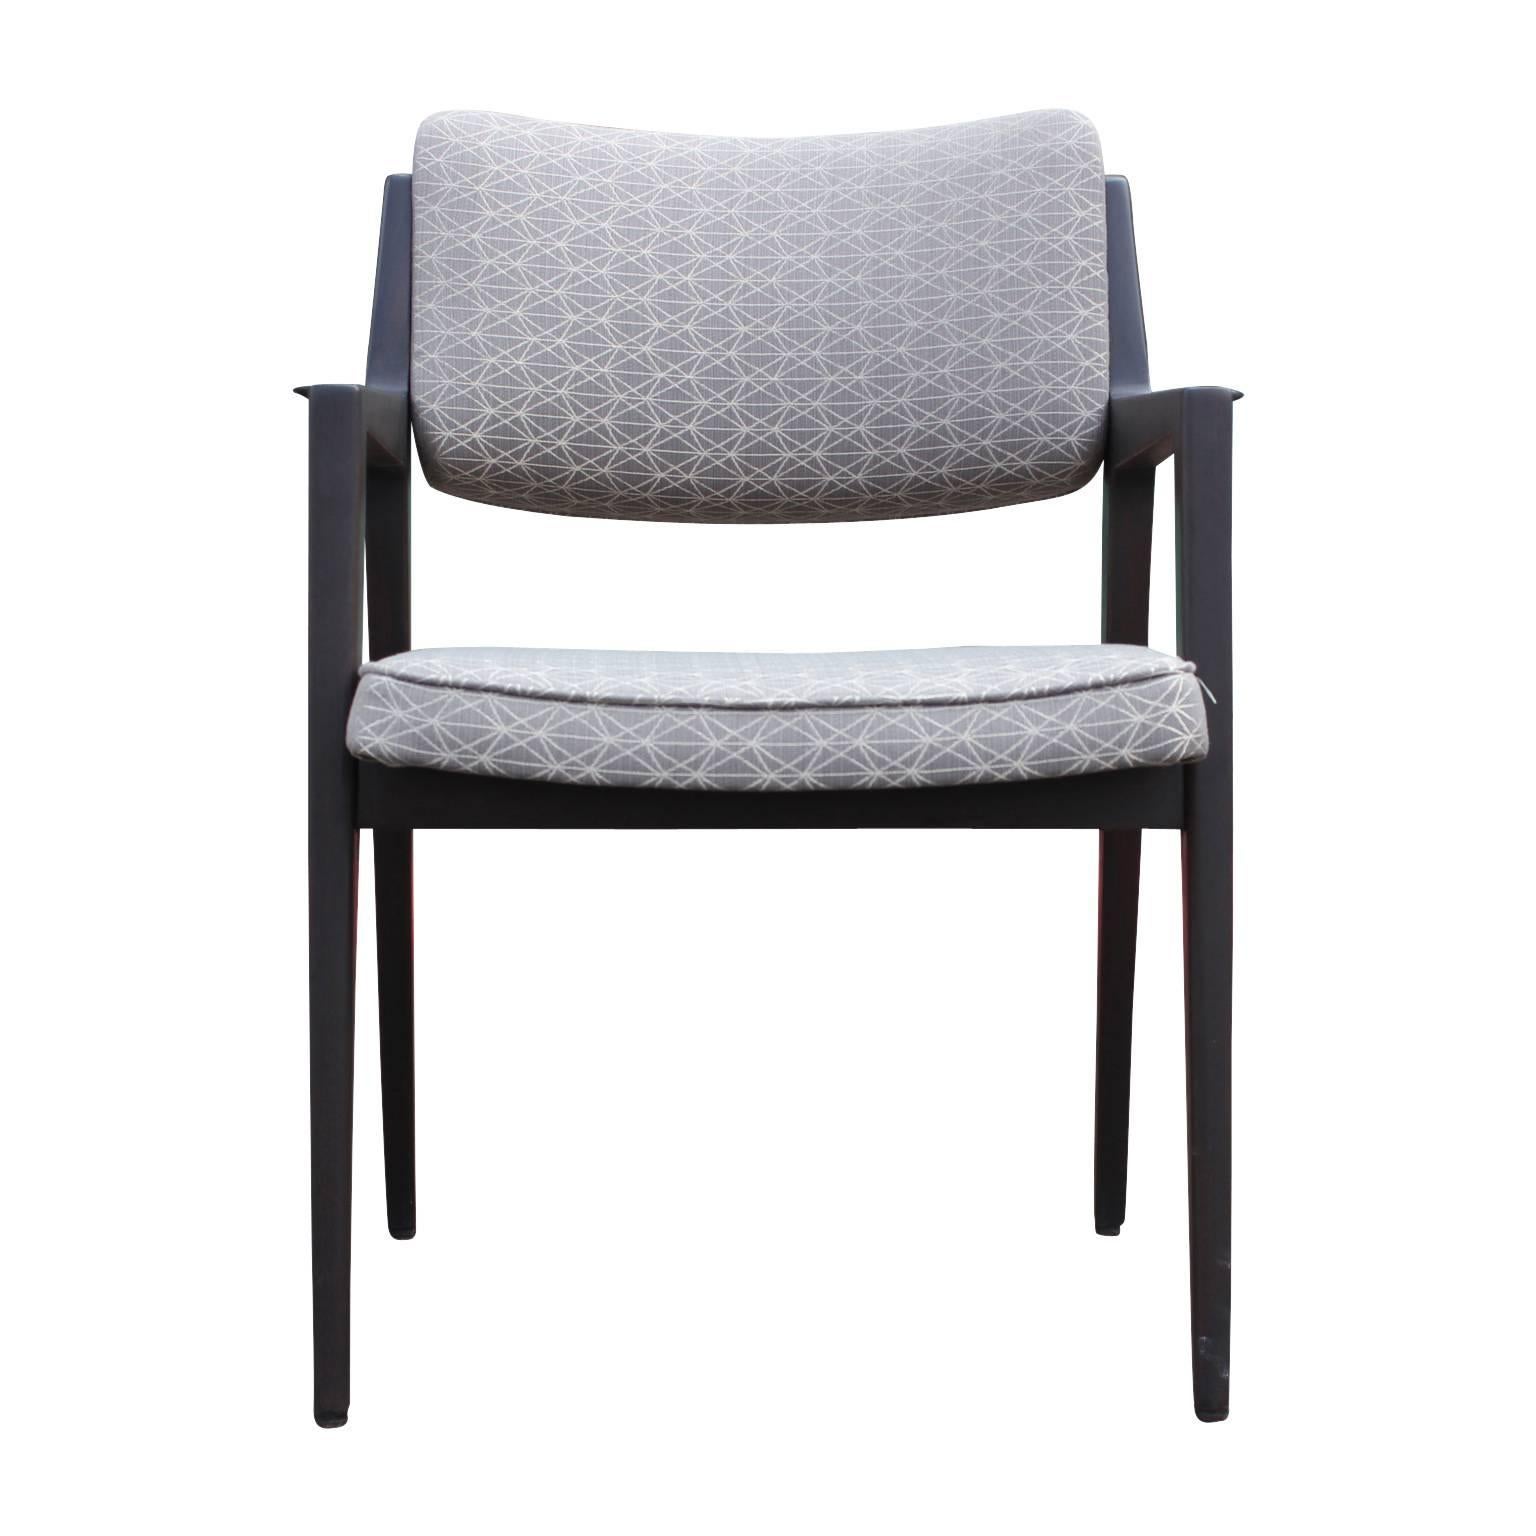 Set of four Italian modern dining chairs recently reupholstered in a chic modern fabric. The chairs all have arms and have been refinished in a charcoal stain.